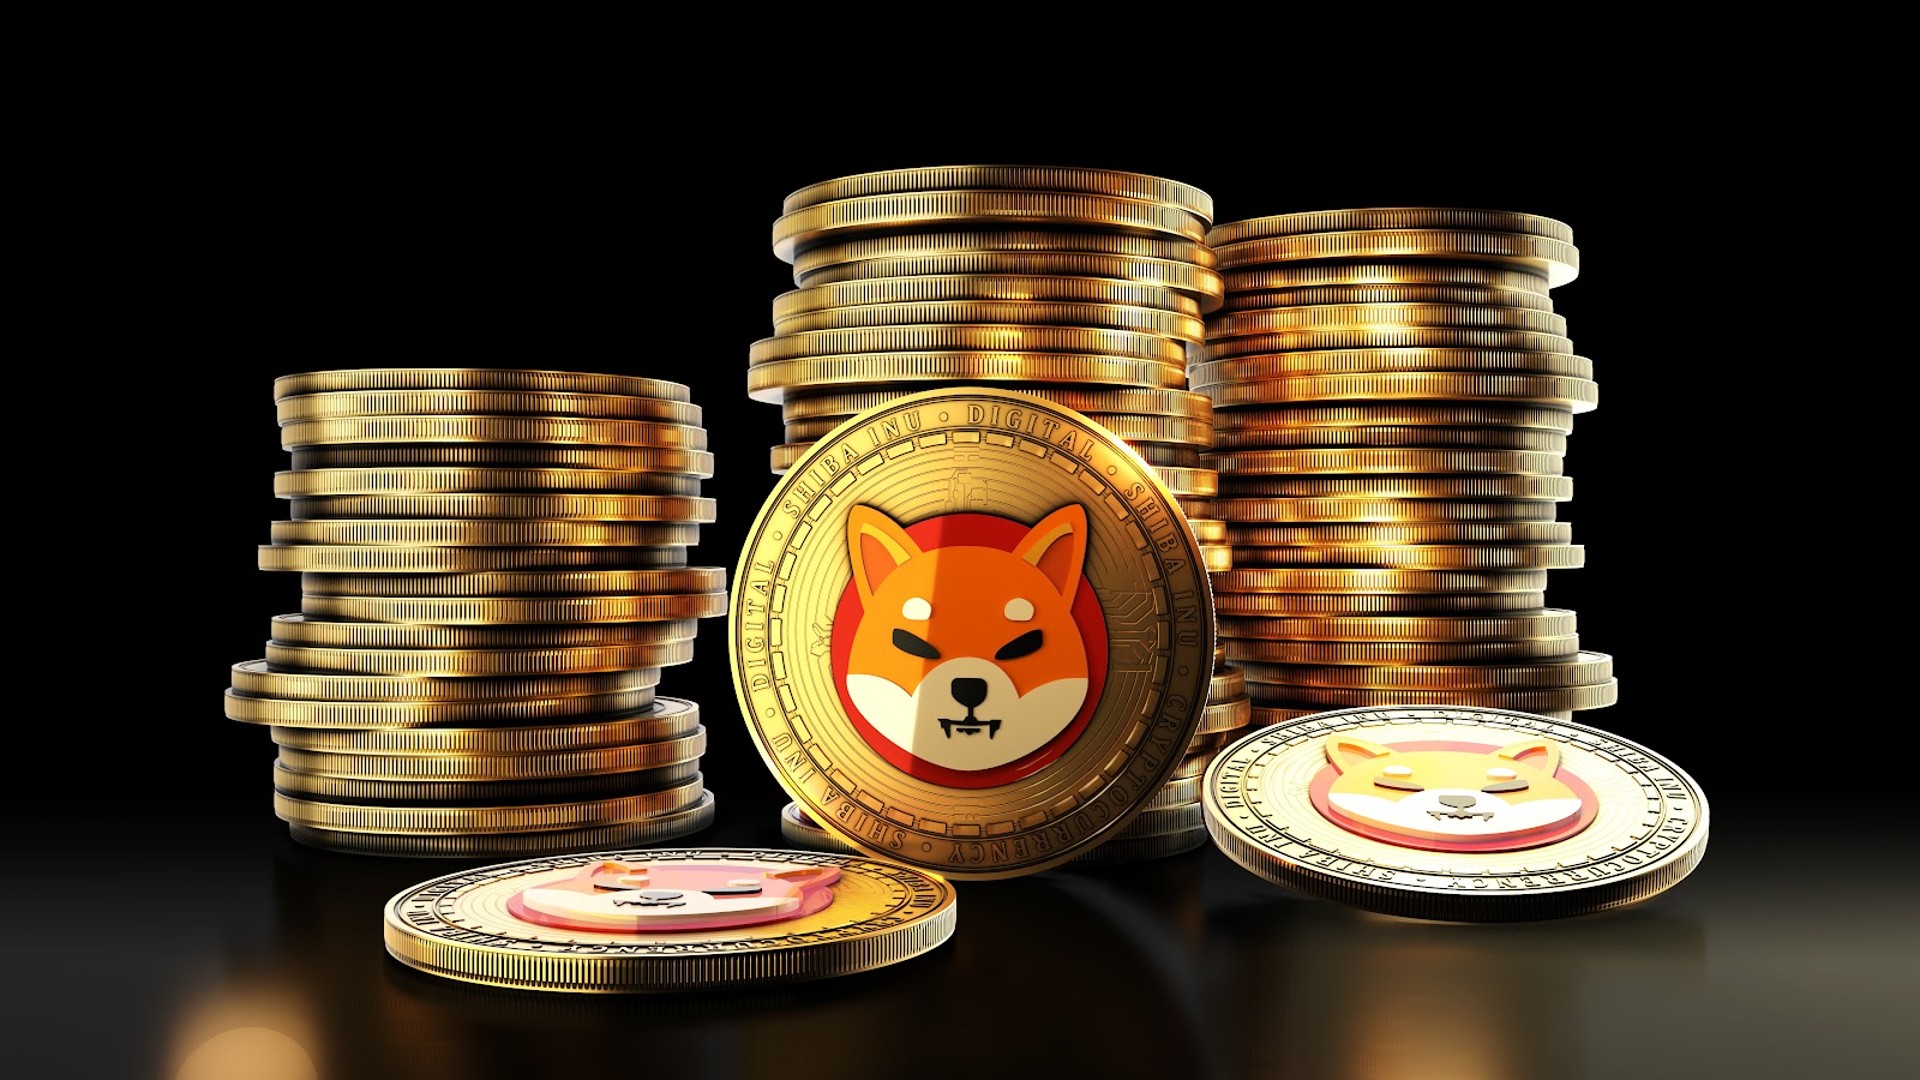 Dogecoin and Shiba Inu’s Reign Threatened by Digitoads in the Meme Coin Market